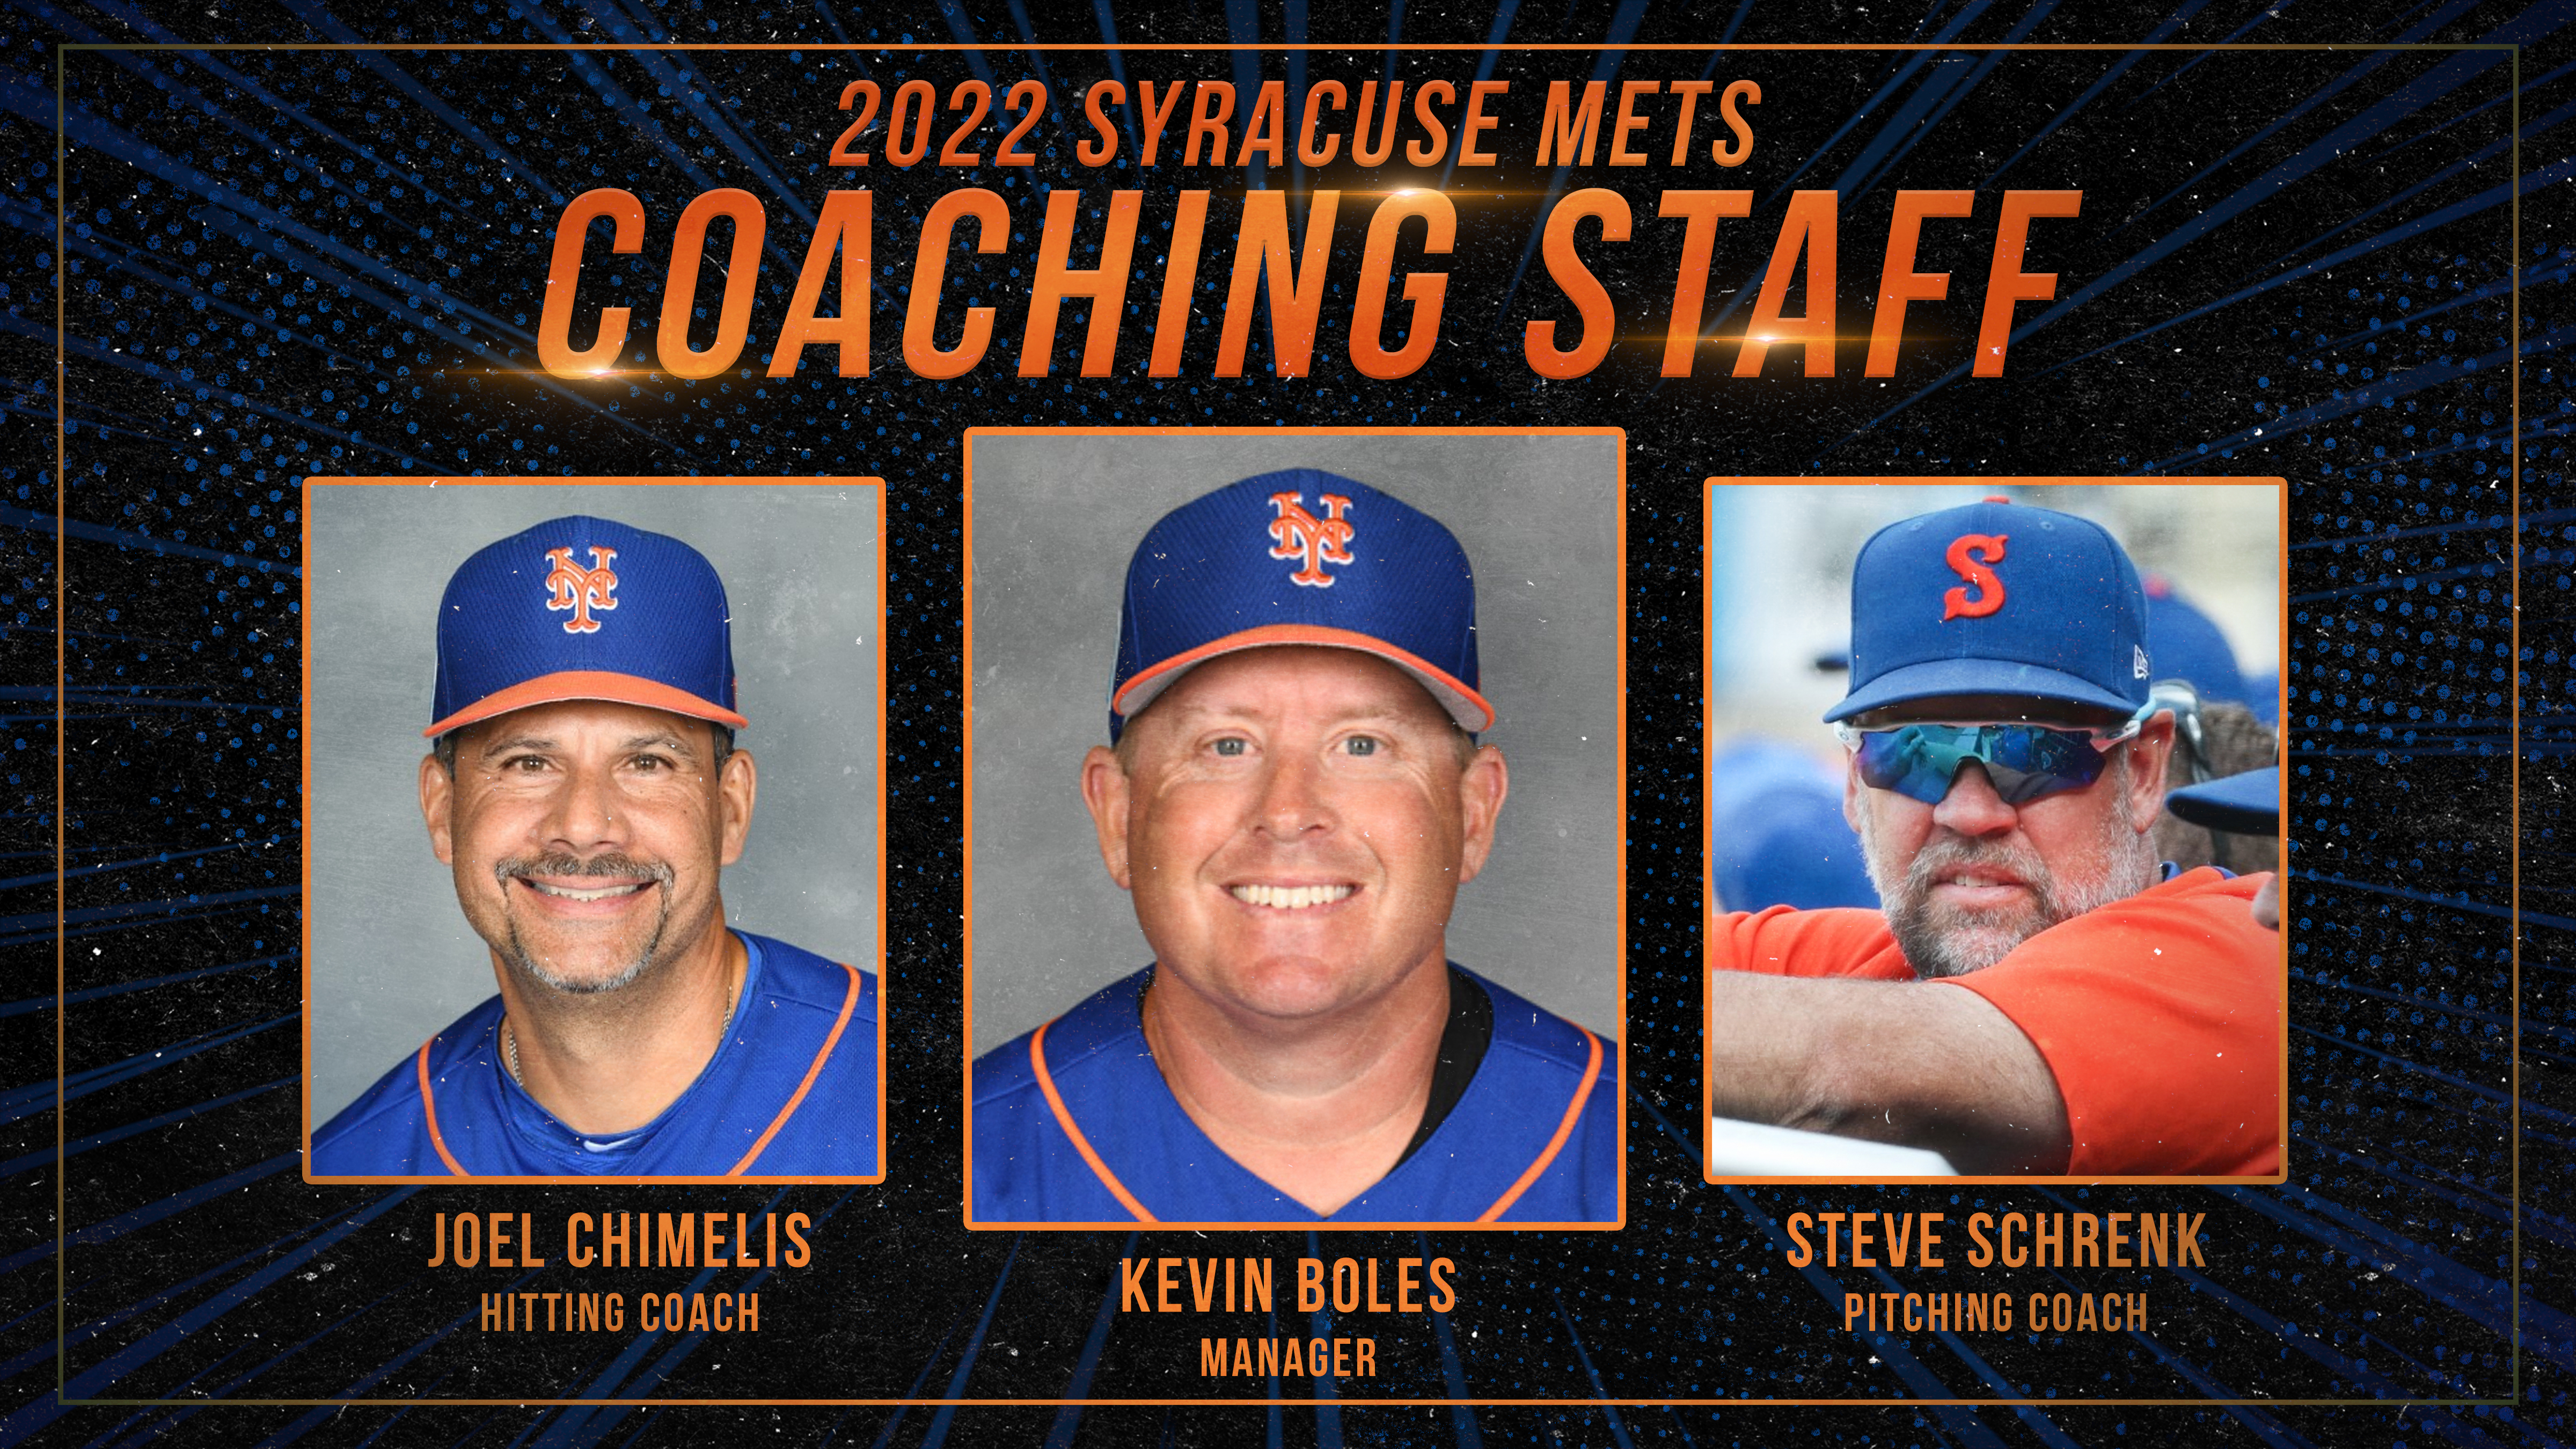 New York Mets announce new Syracuse manager for 2022 